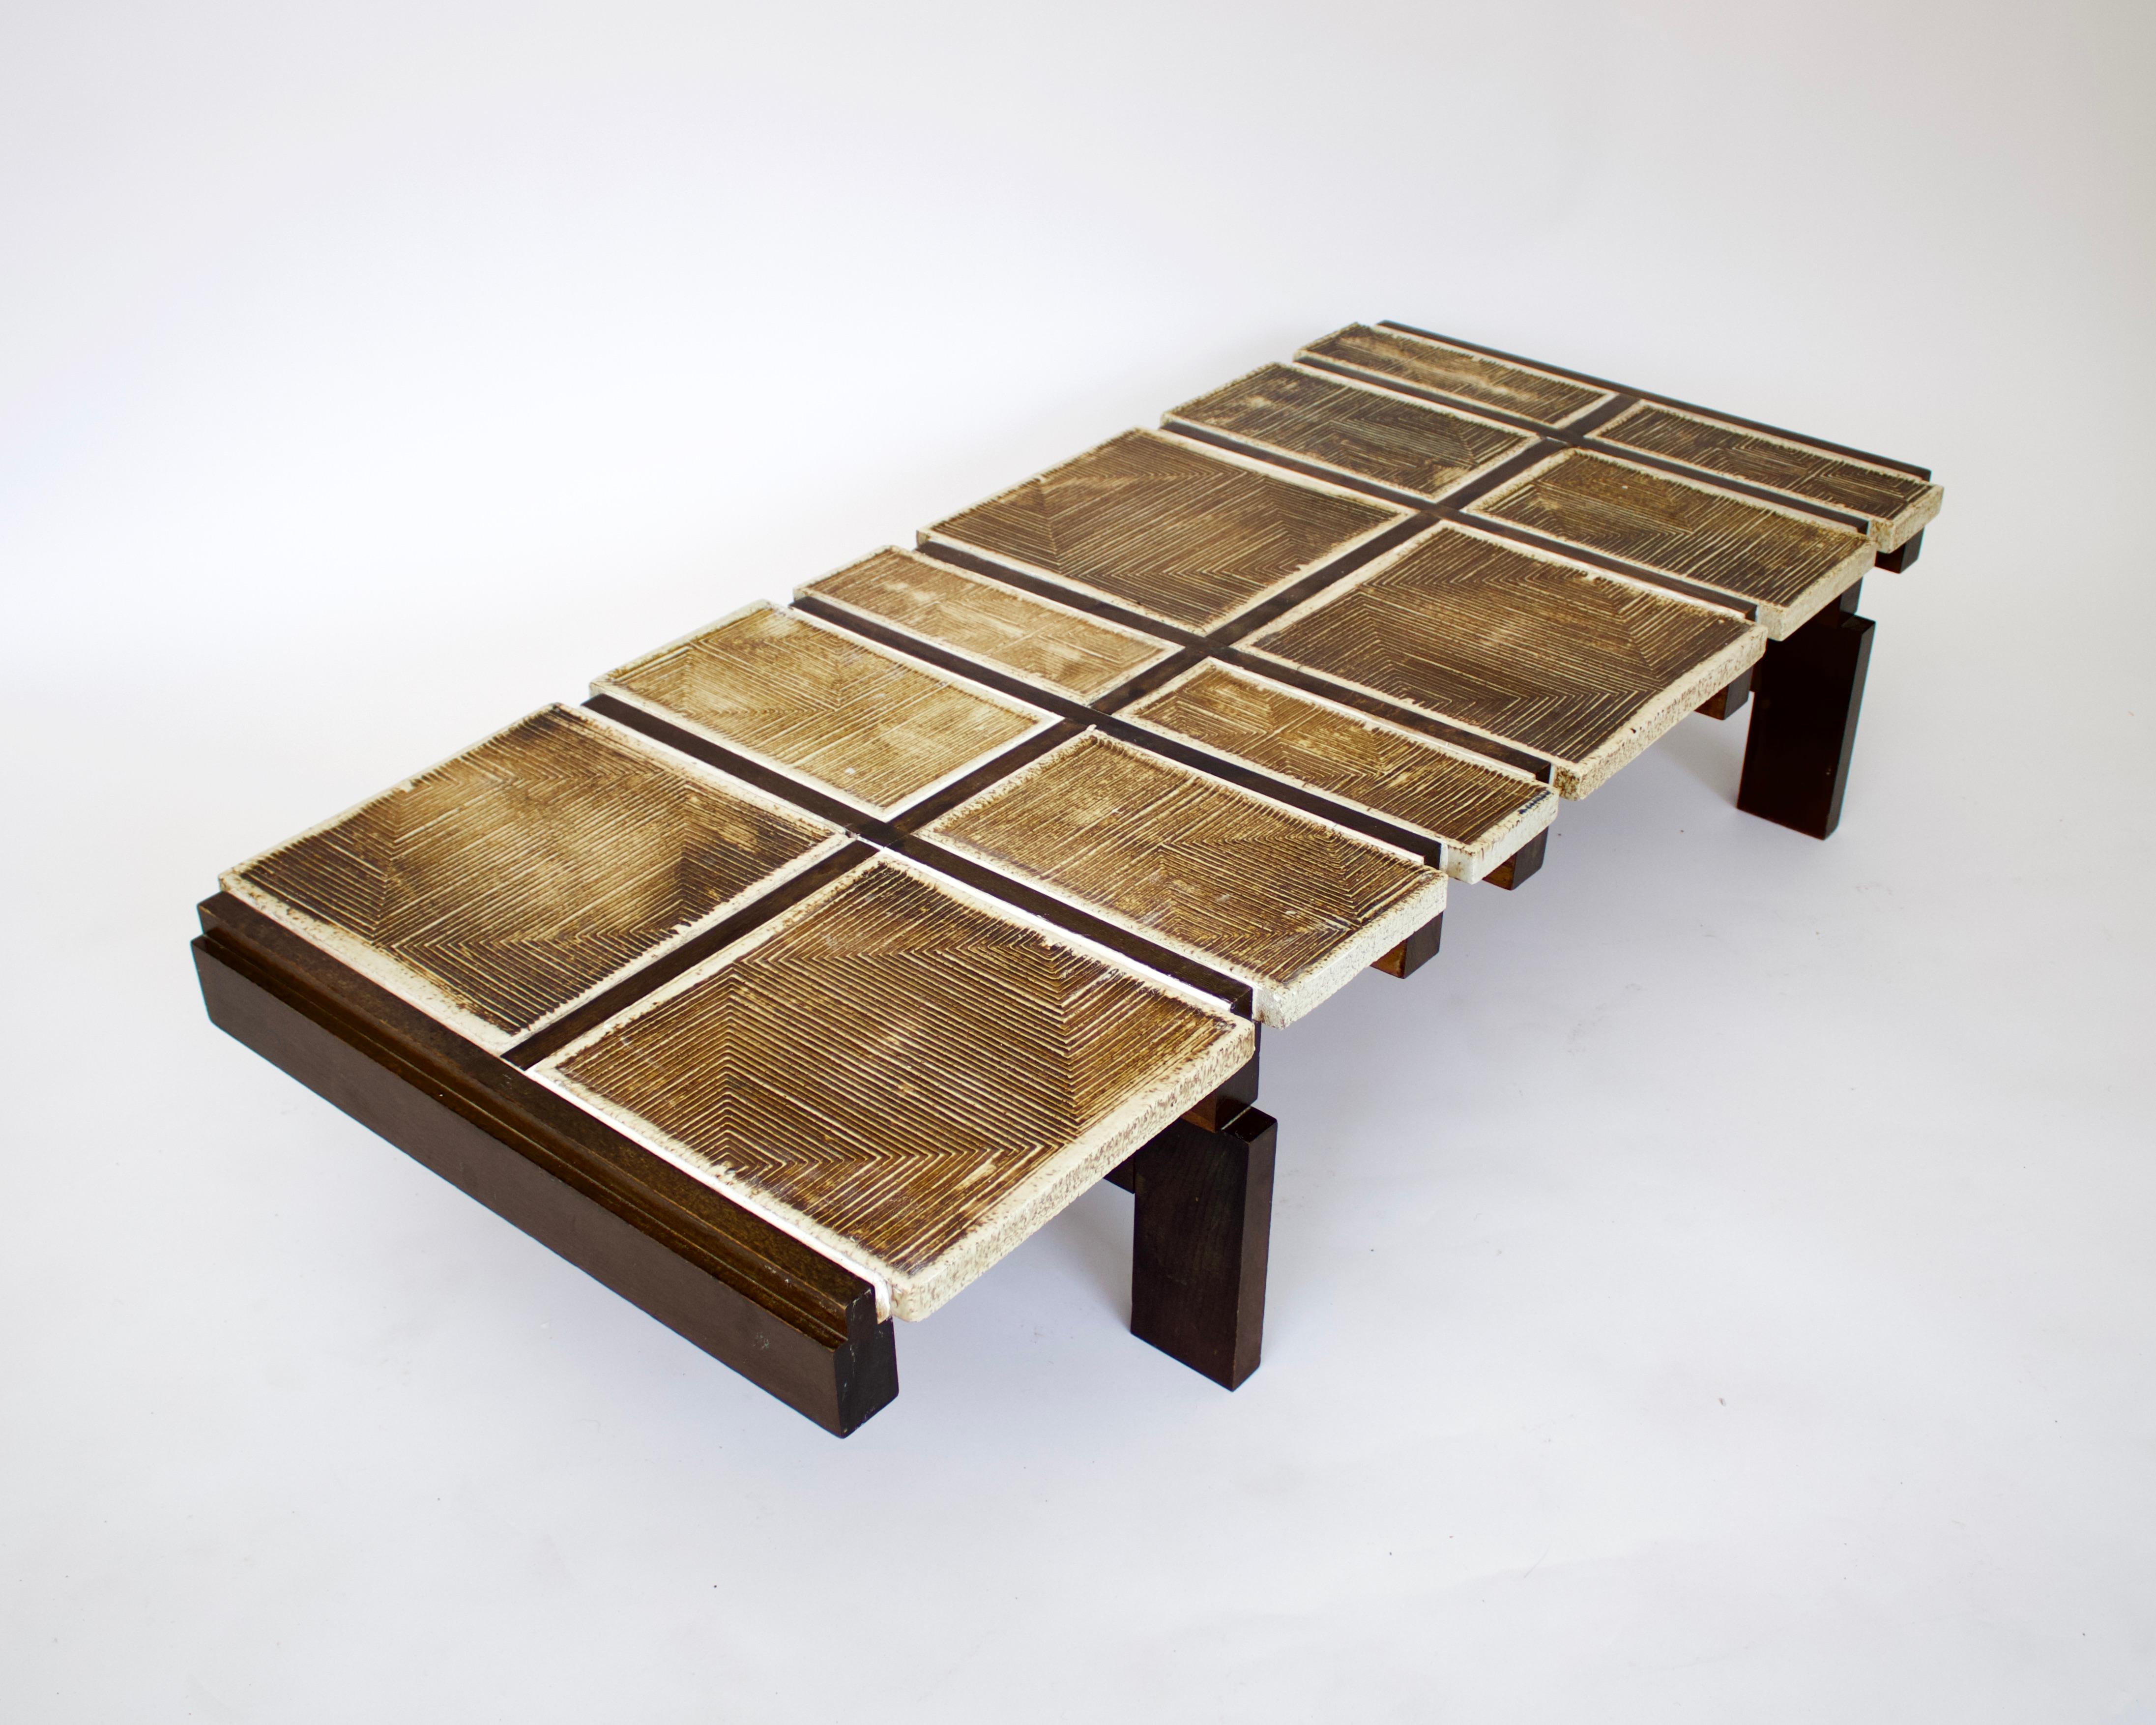 A ceramic tile coffee table by Roger Capron, model Alouette, 1970-1971.
This rare coffee table from one of the masters of ceramics and ceramic tile coffee tables from Vallauris is composed of heavily scraffito tiles on a dark wood base.
It is